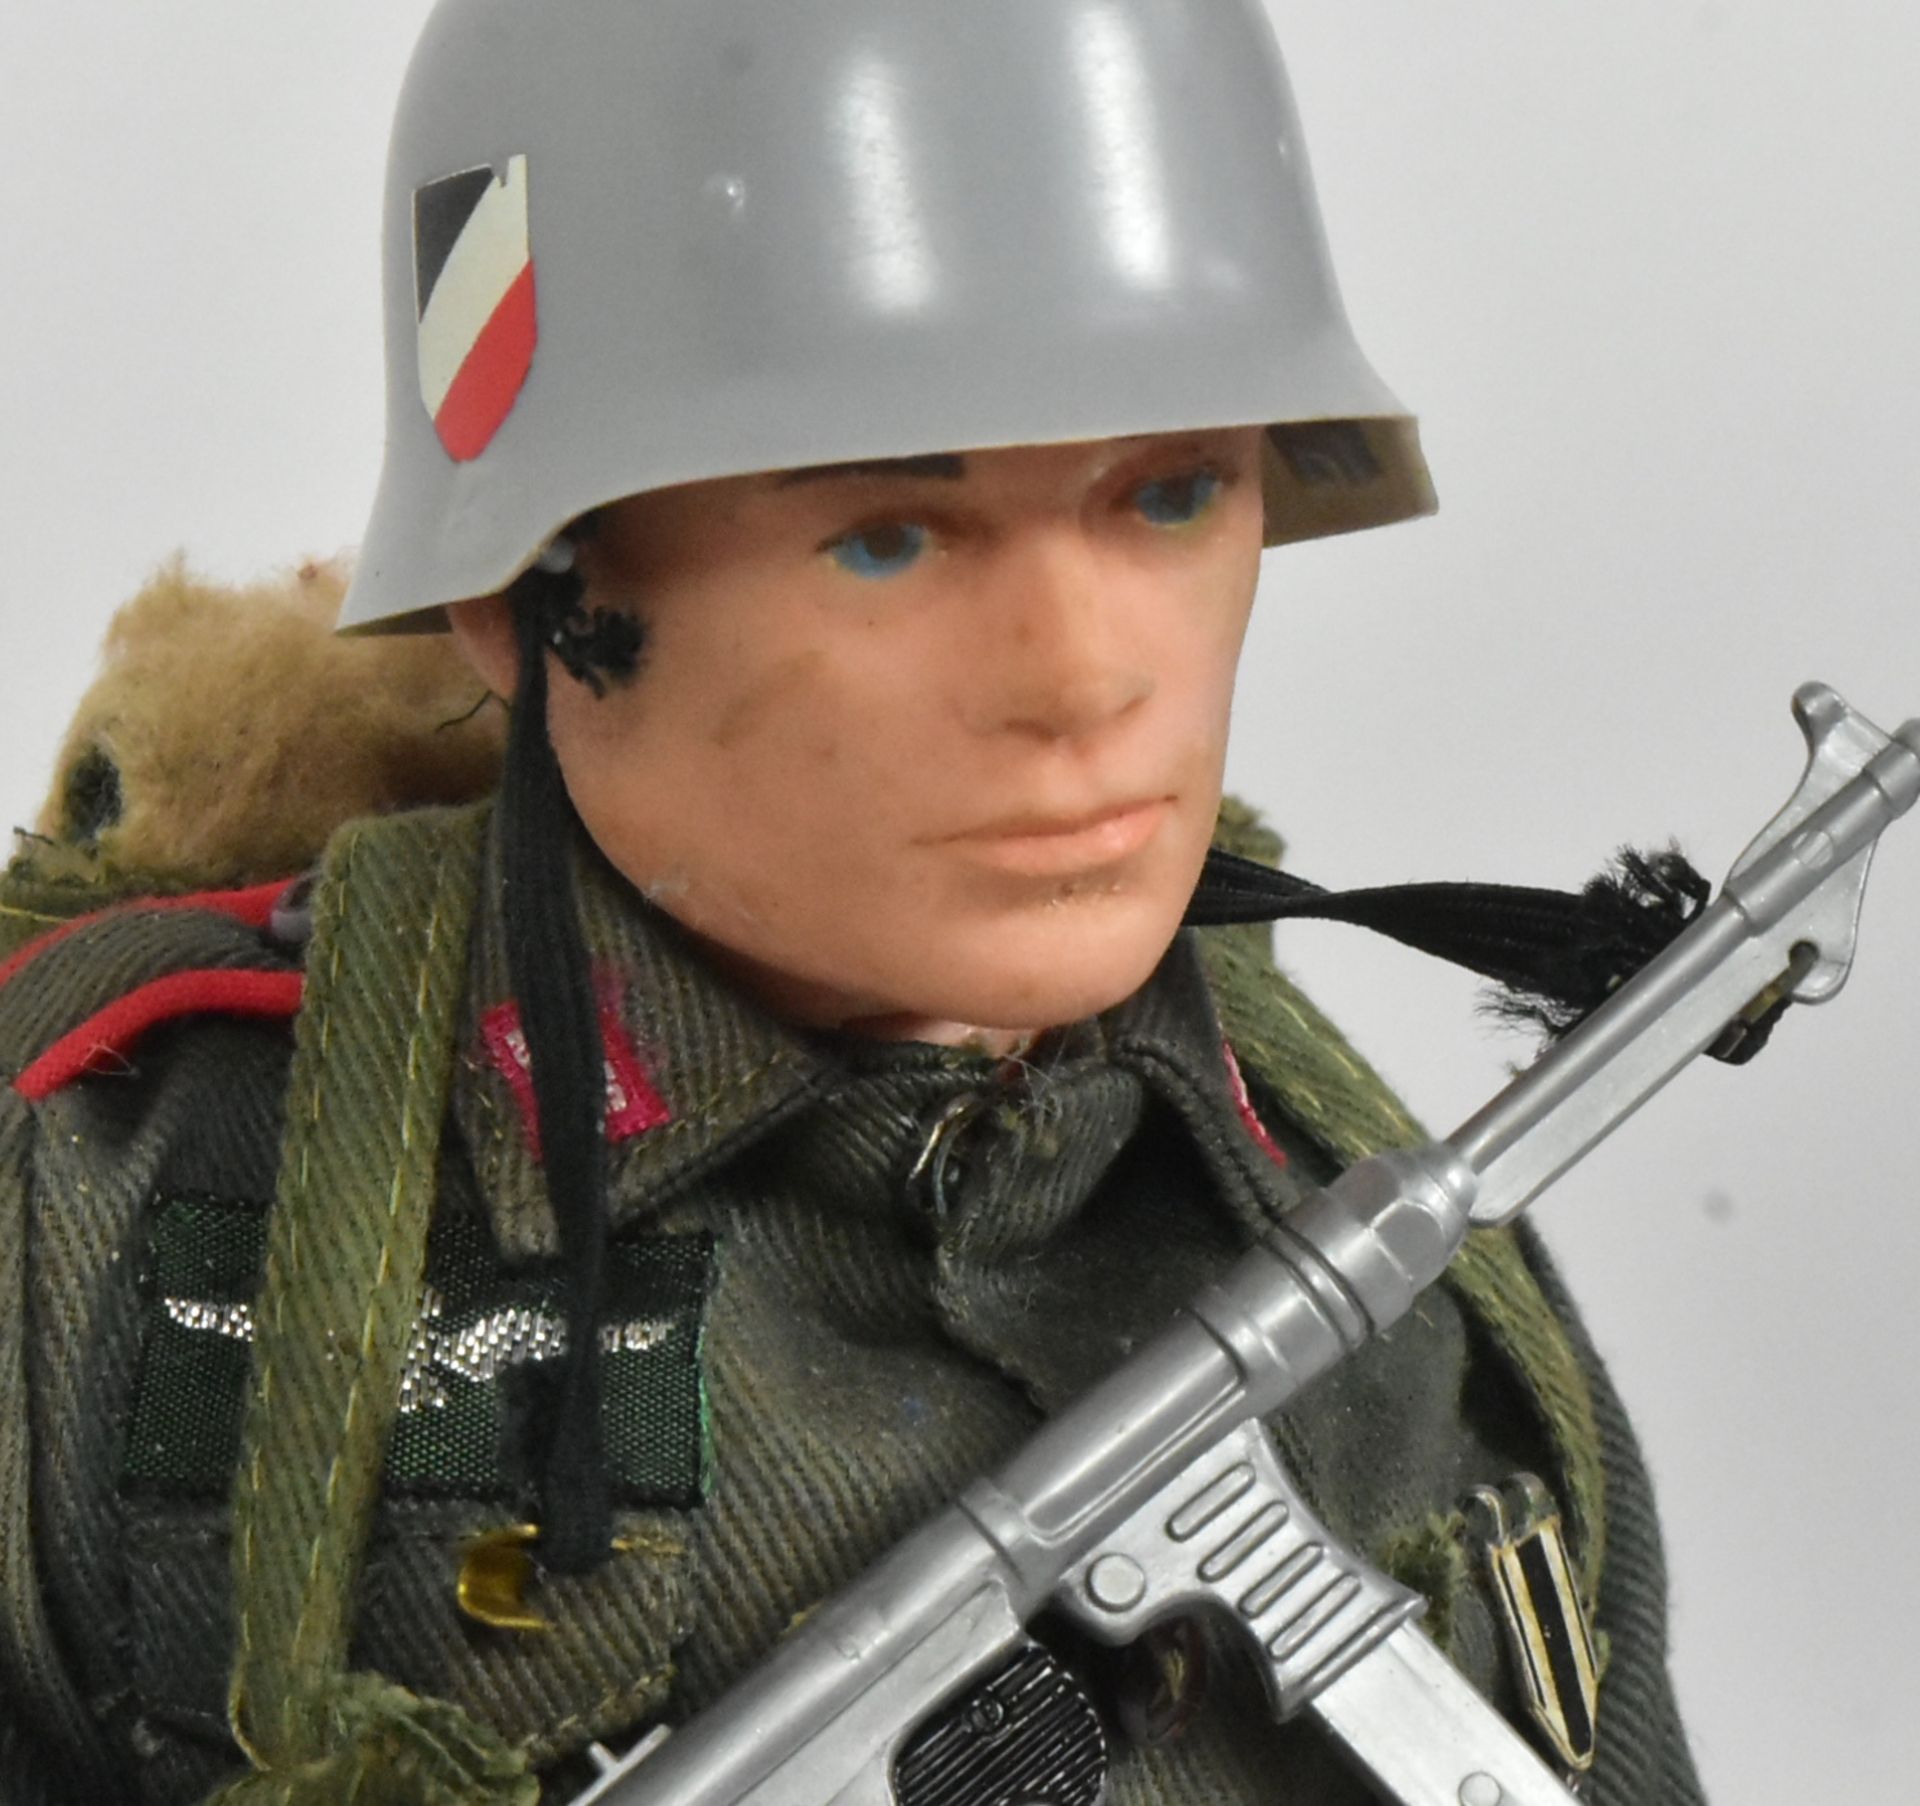 ACTION MAN - X2 VINTAGE PALITOY ACTION MAN FIGURES - Image 4 of 5